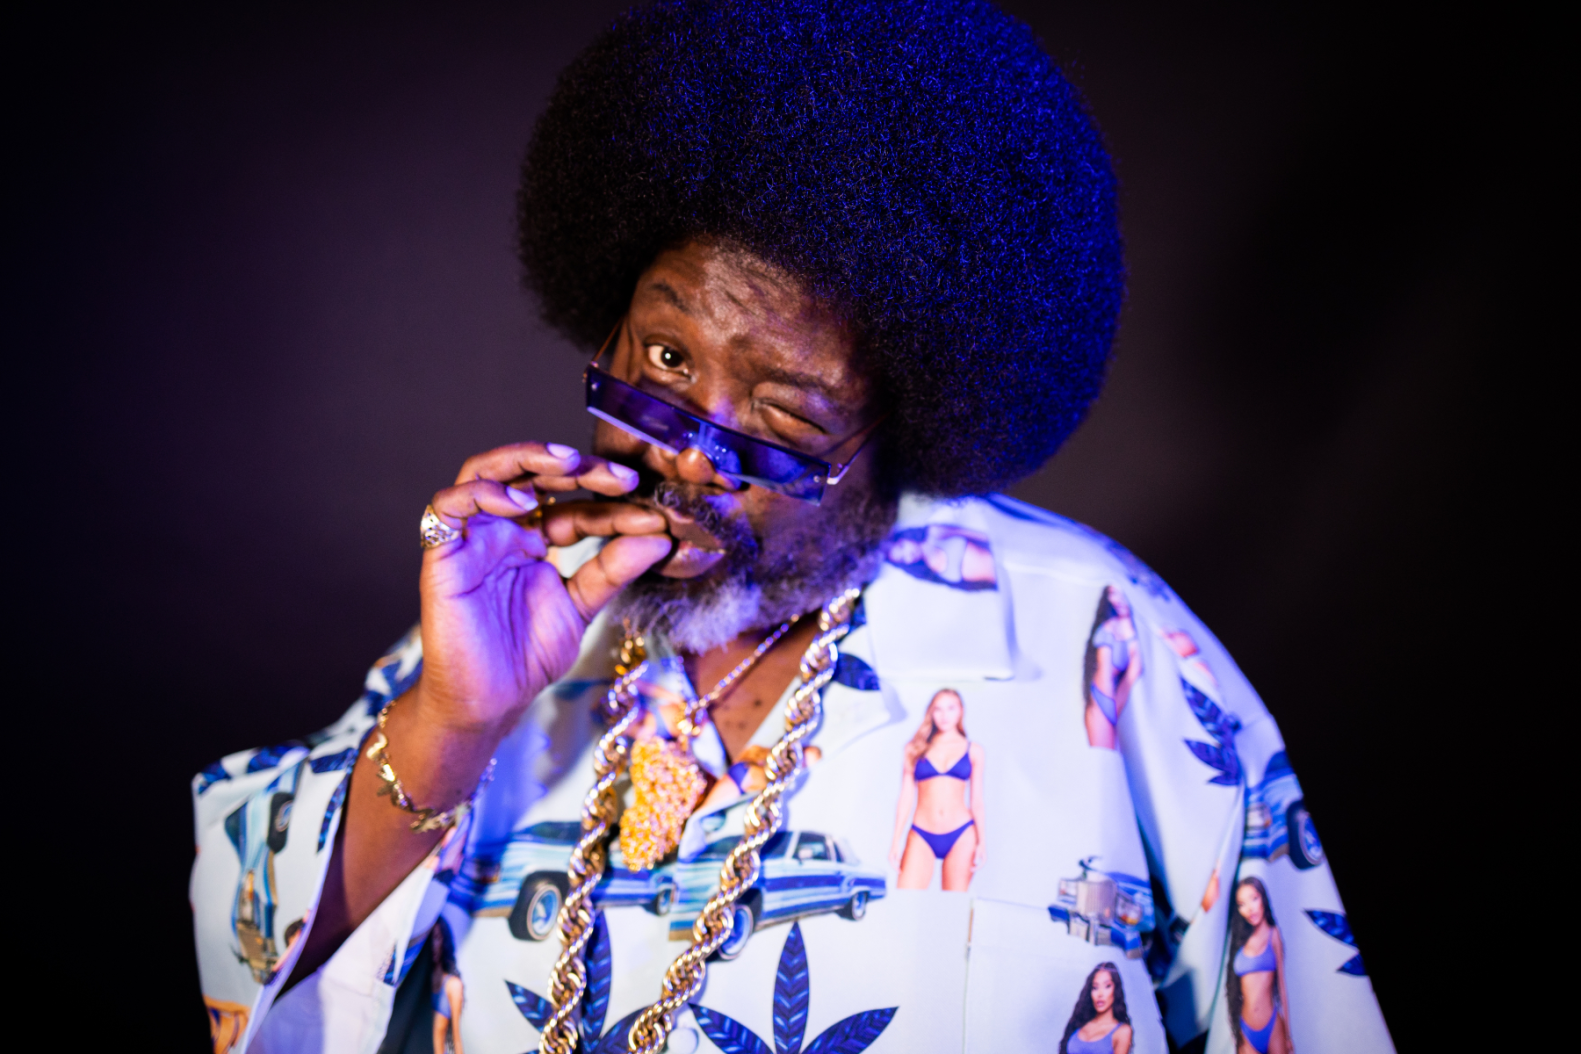 Afroman Just Got Sued for Using a Clip of Cops Raiding His House in Music Video